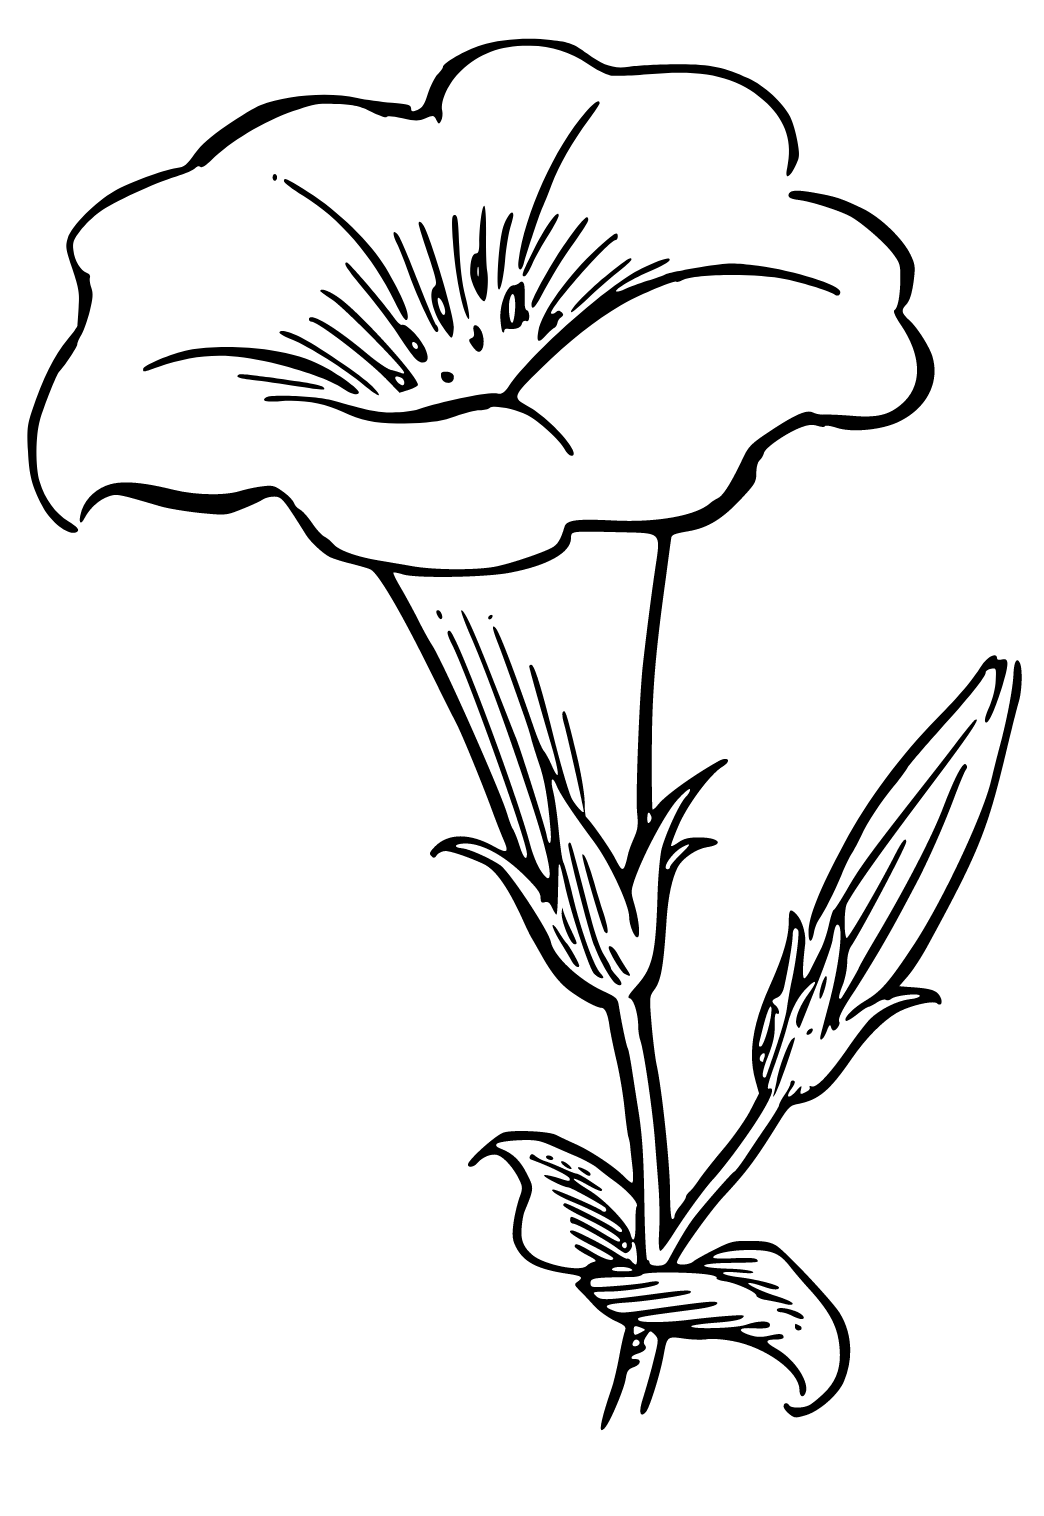 Free Printable Flower Real Coloring Page for Adults and Kids - Lystok.com